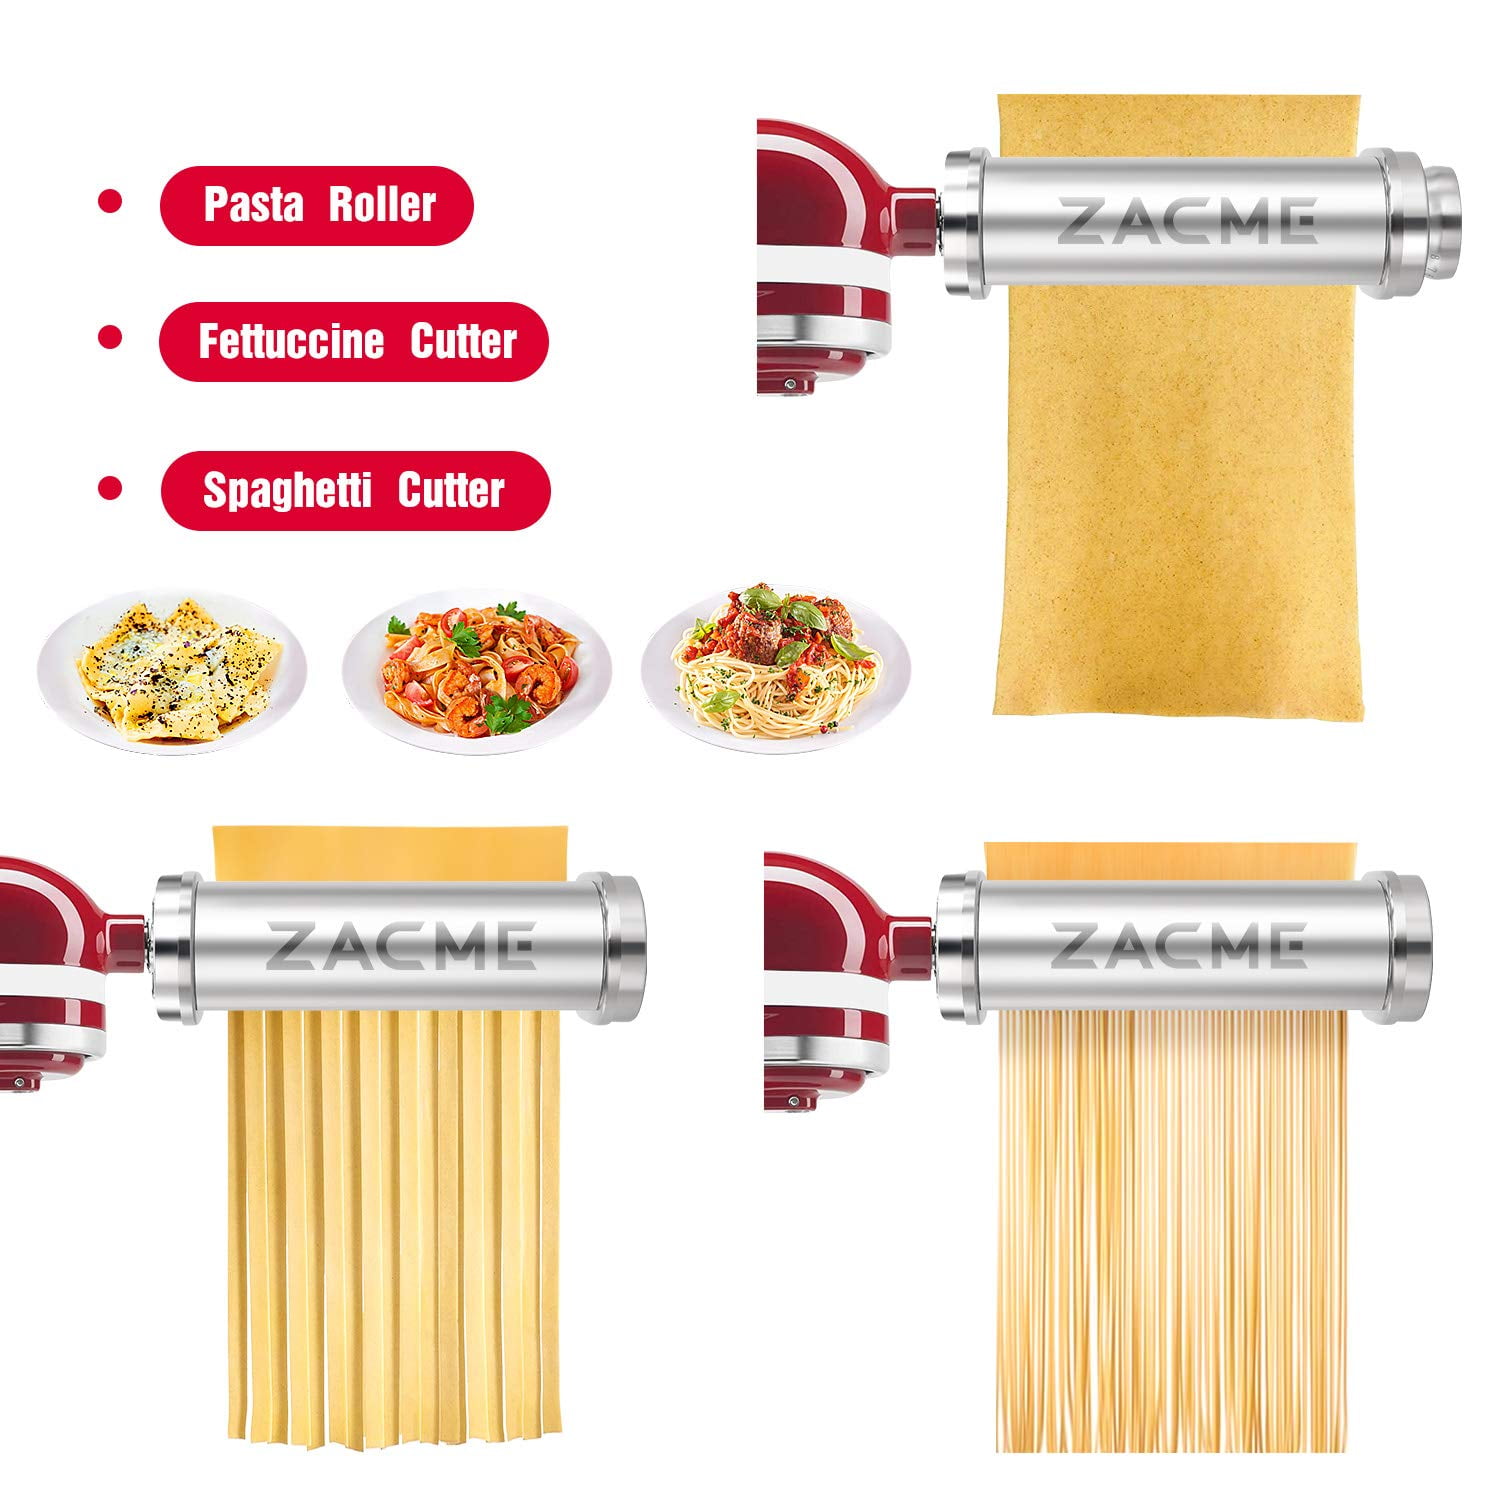 Pasta Roller Sheet Attachment for KitchenAid Stand Mixer Stainless Steel Pasta Maker Accessory by Coolcook